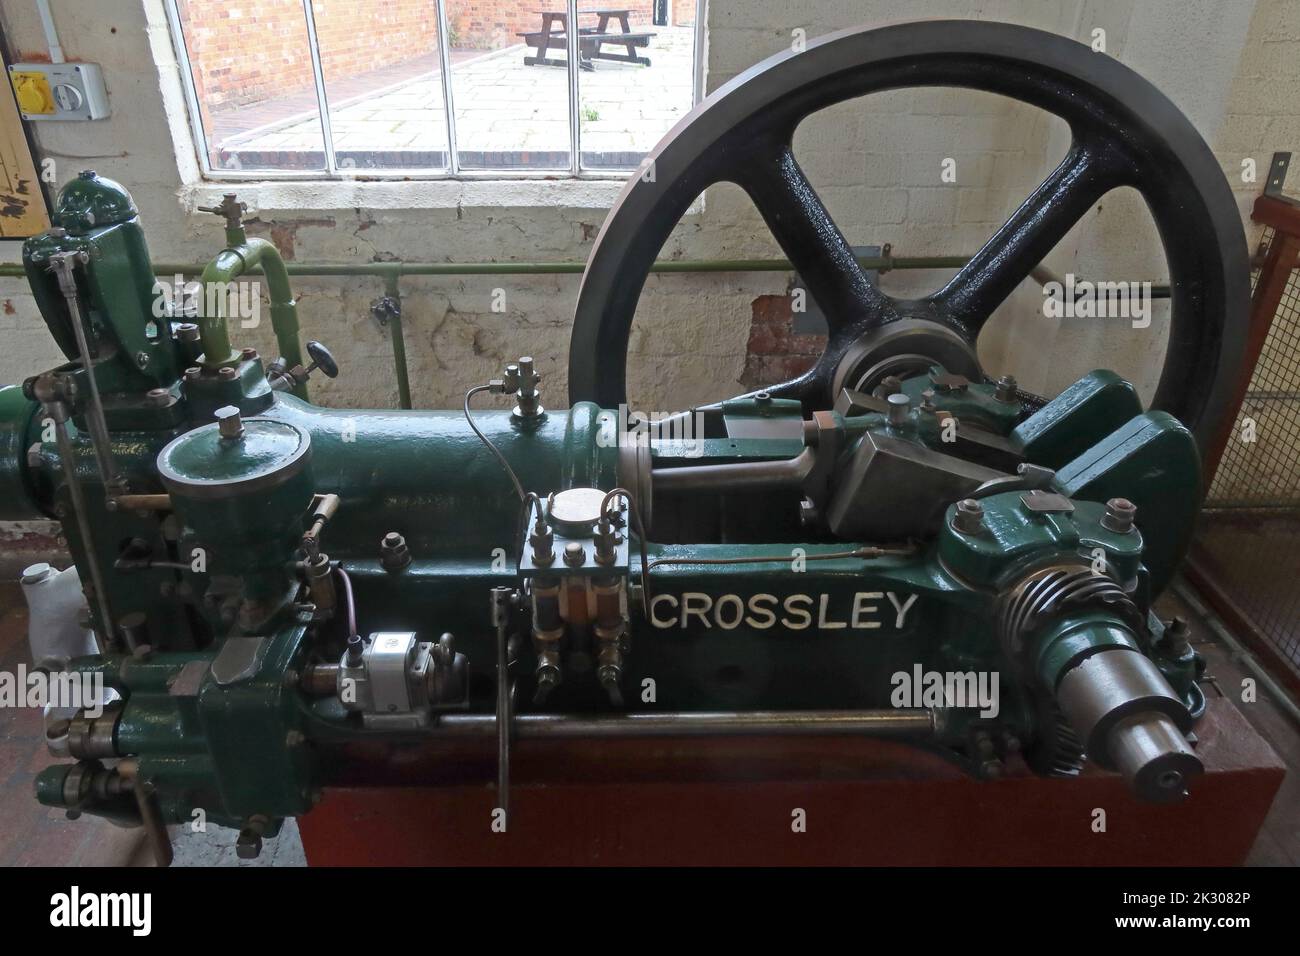 Crossley Power Hall engine, for driving boats, at National Waterways Museum, South Pier Road, Ellesmere Port, Cheshire, England, UK, CH65 4FW Stock Photo